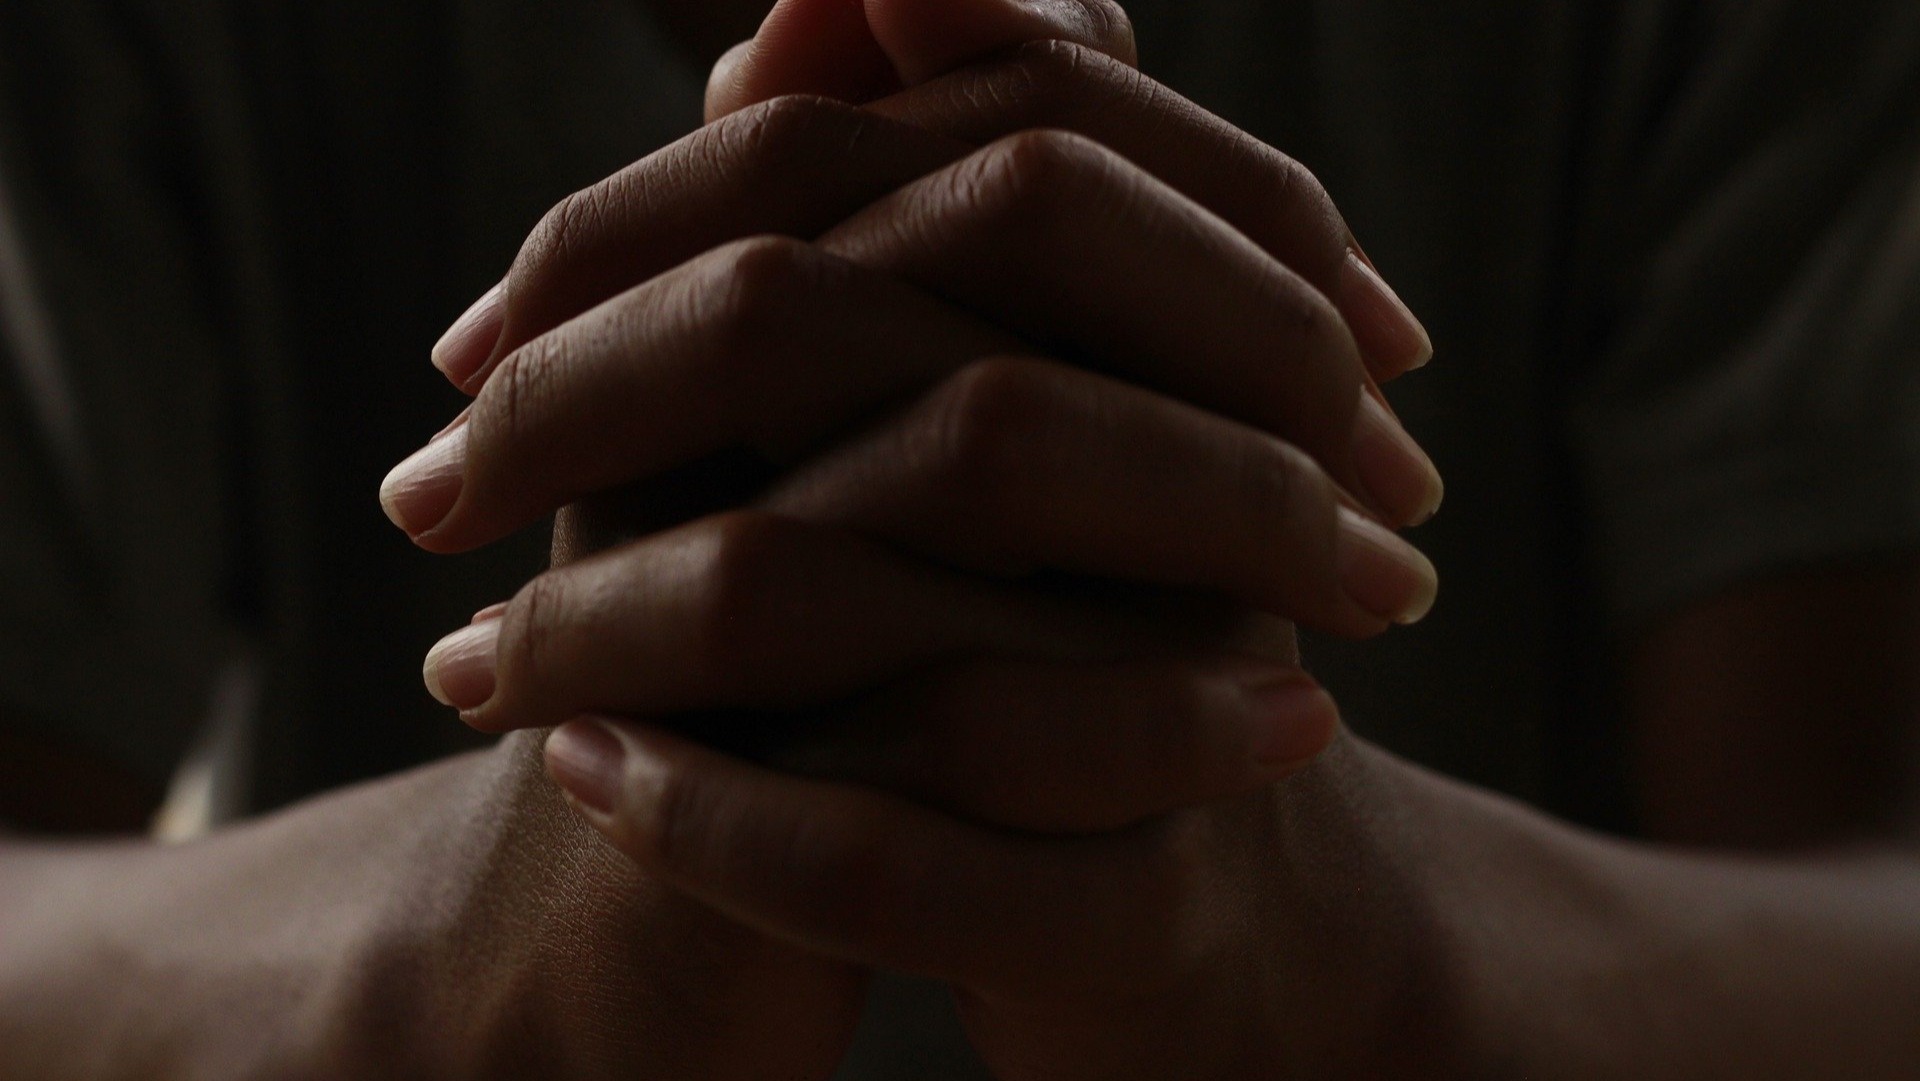 Two hands clasped together in prayer